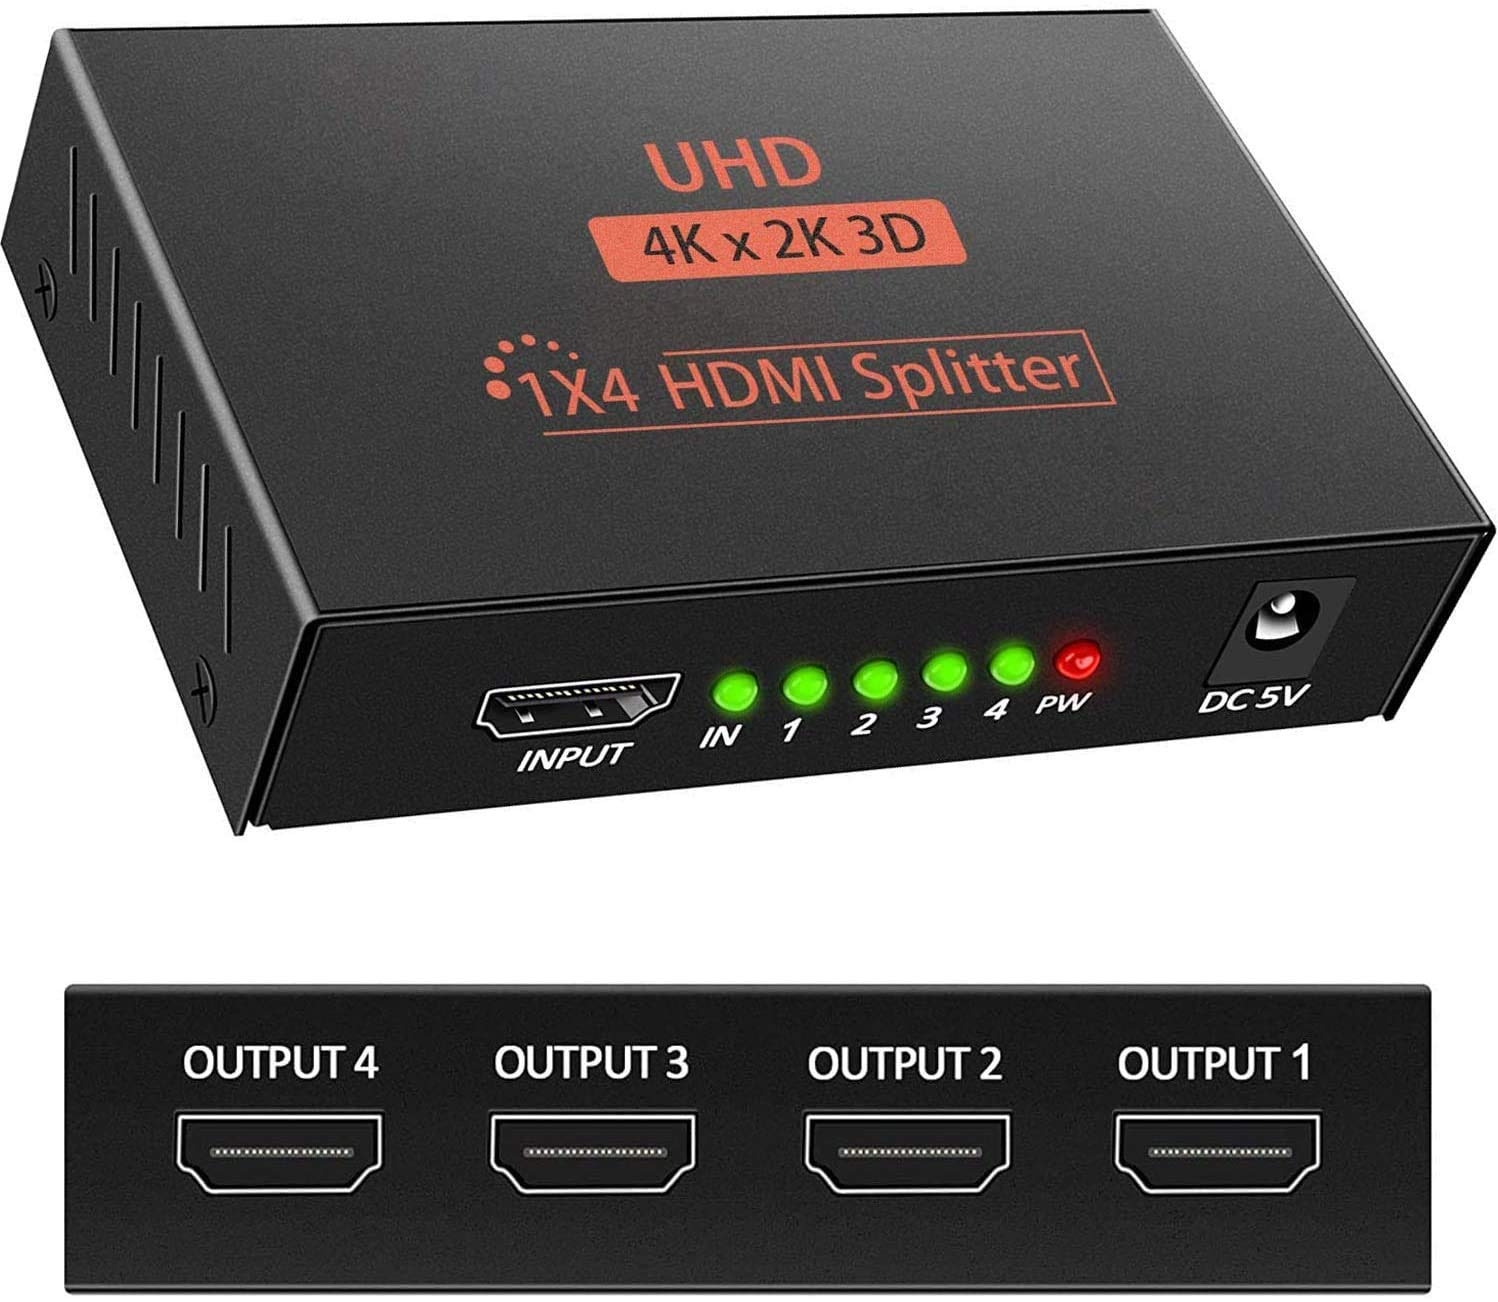 MICROWARE UHD 4K*2K 4 Port HDMI Splitter 1 In 4 Out Hub Repeater 3D, 1080p Female HDMI Audio Cable Converter Adapter